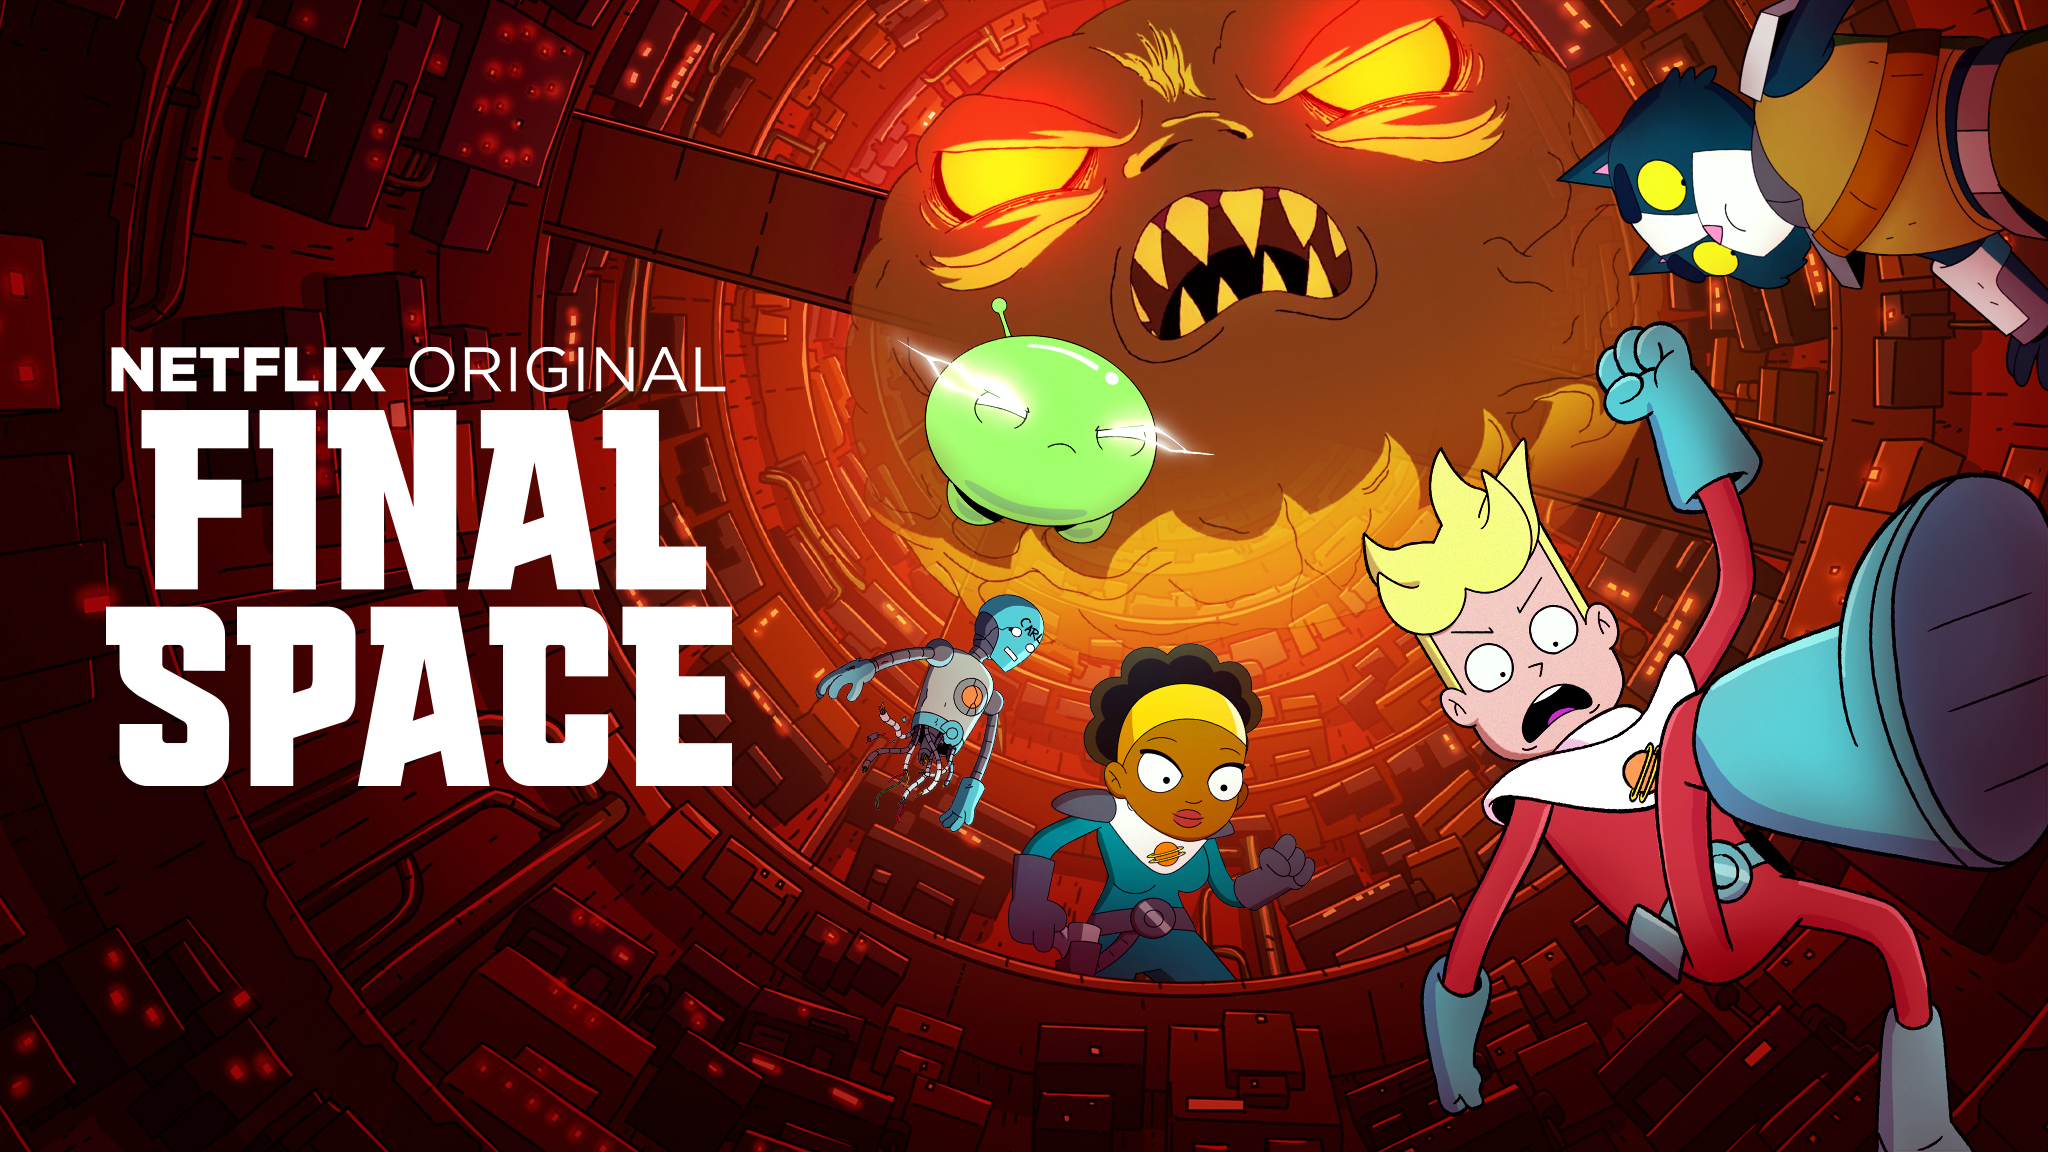 Avocato Final Space Final Space Gary Goodspeed Lord Commander Final Space Mooncake Final Space Quinn 2048x1152